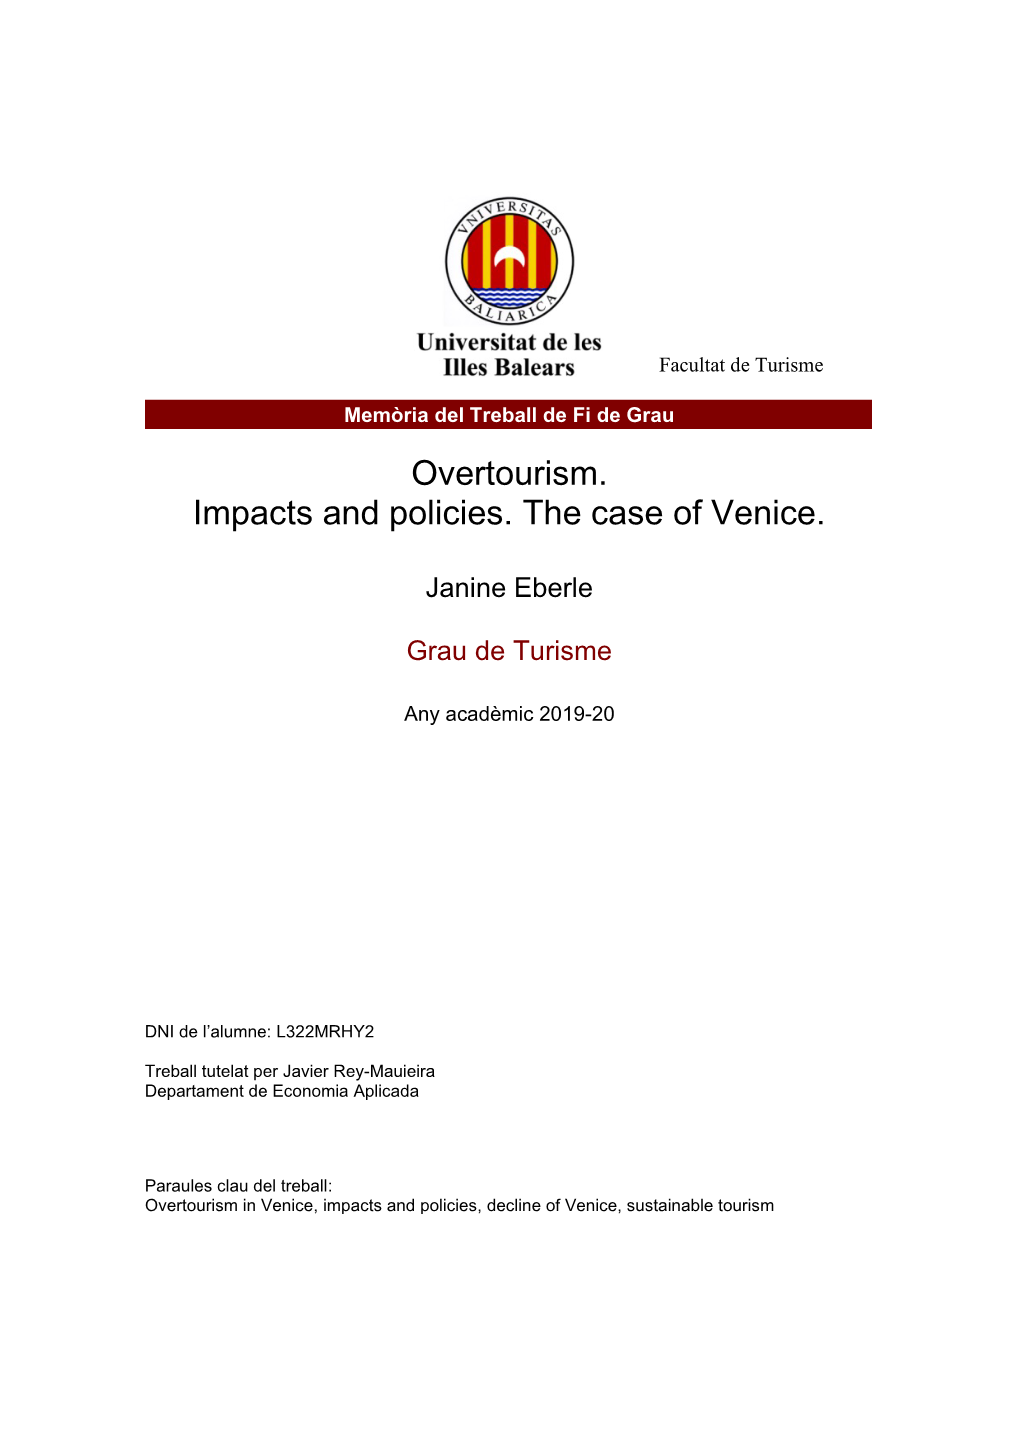 Overtourism. Impacts and Policies. the Case of Venice